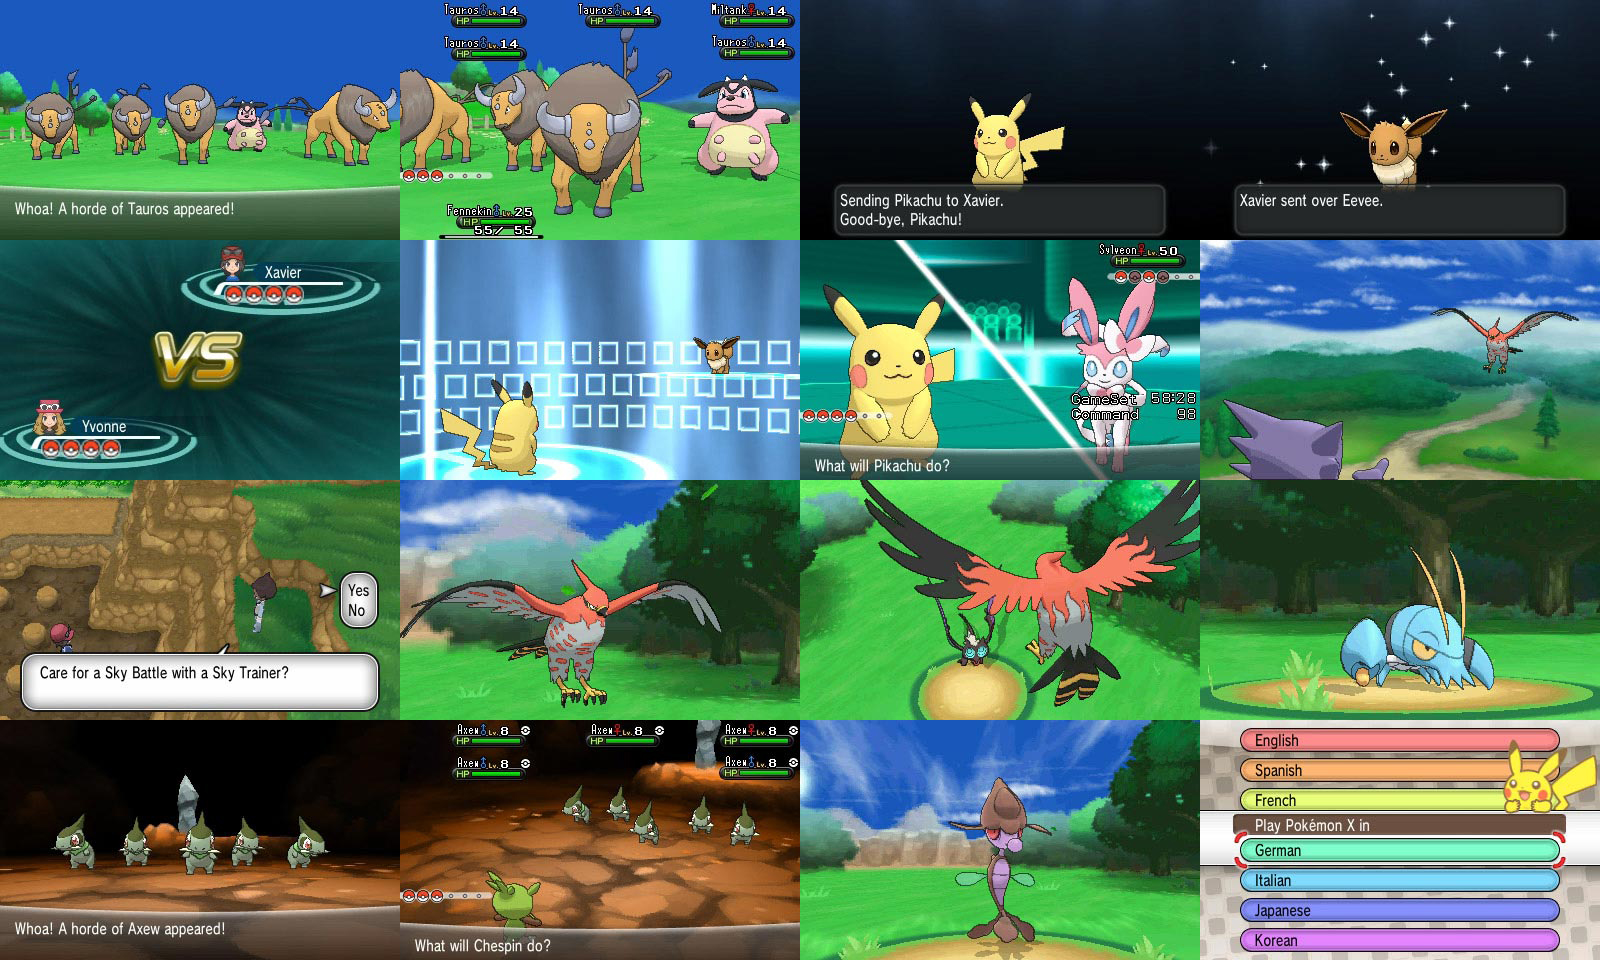 Pokémon X and Y have several new features, first is Sky Battles, which allo...